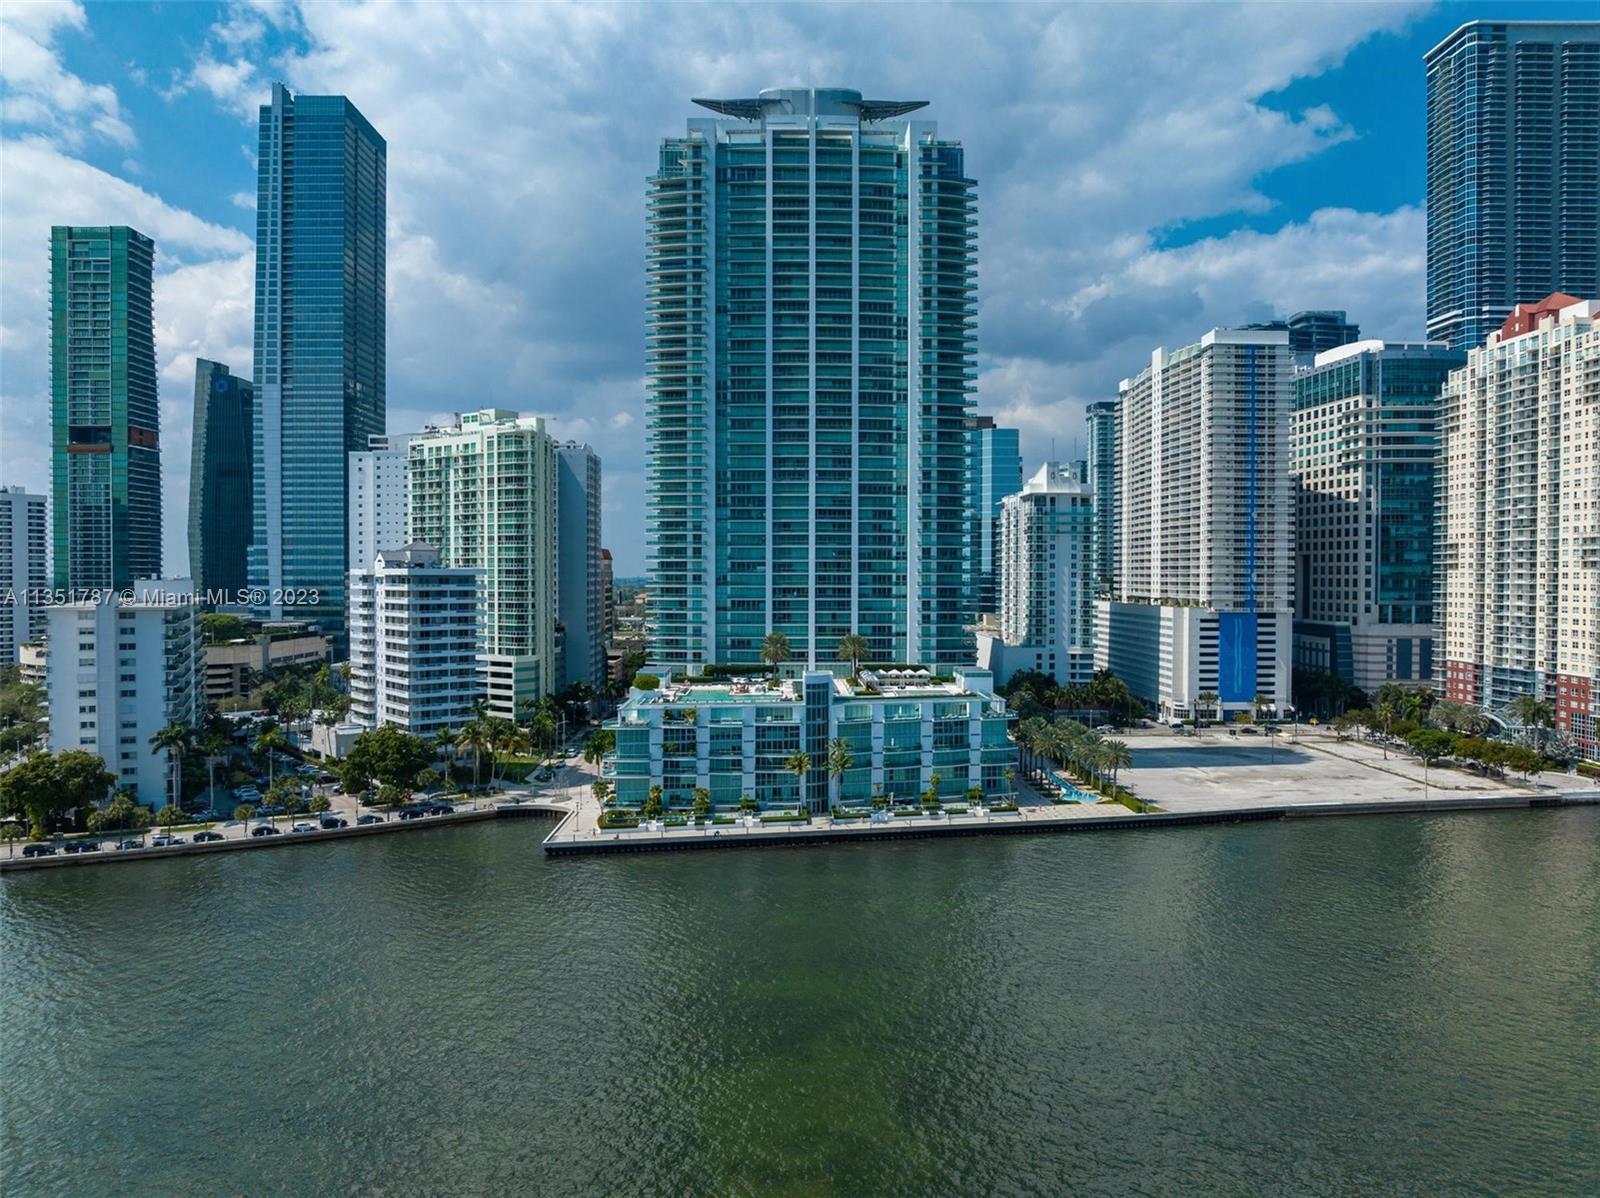 2/2 at sought after JADE at Brickell. The property is currently occupied, and occupants cannot be di